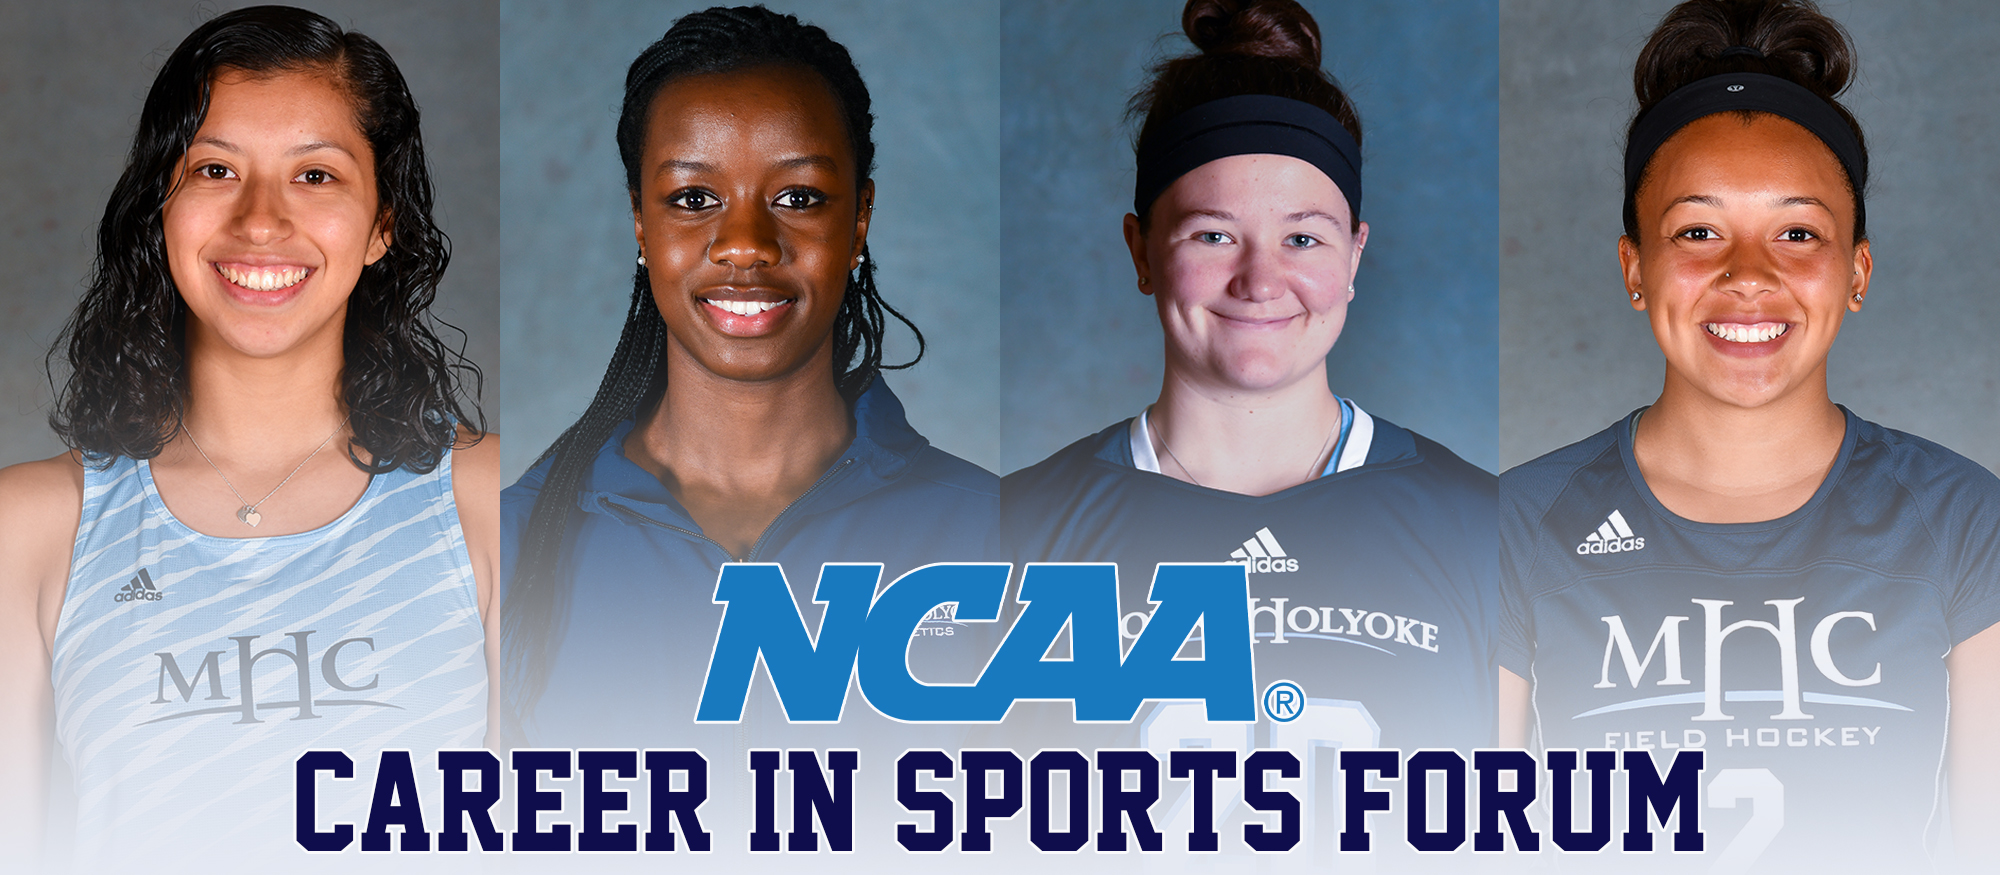 Four Student-Athletes to Attend NCAA Career in Sports Forum May 27-29